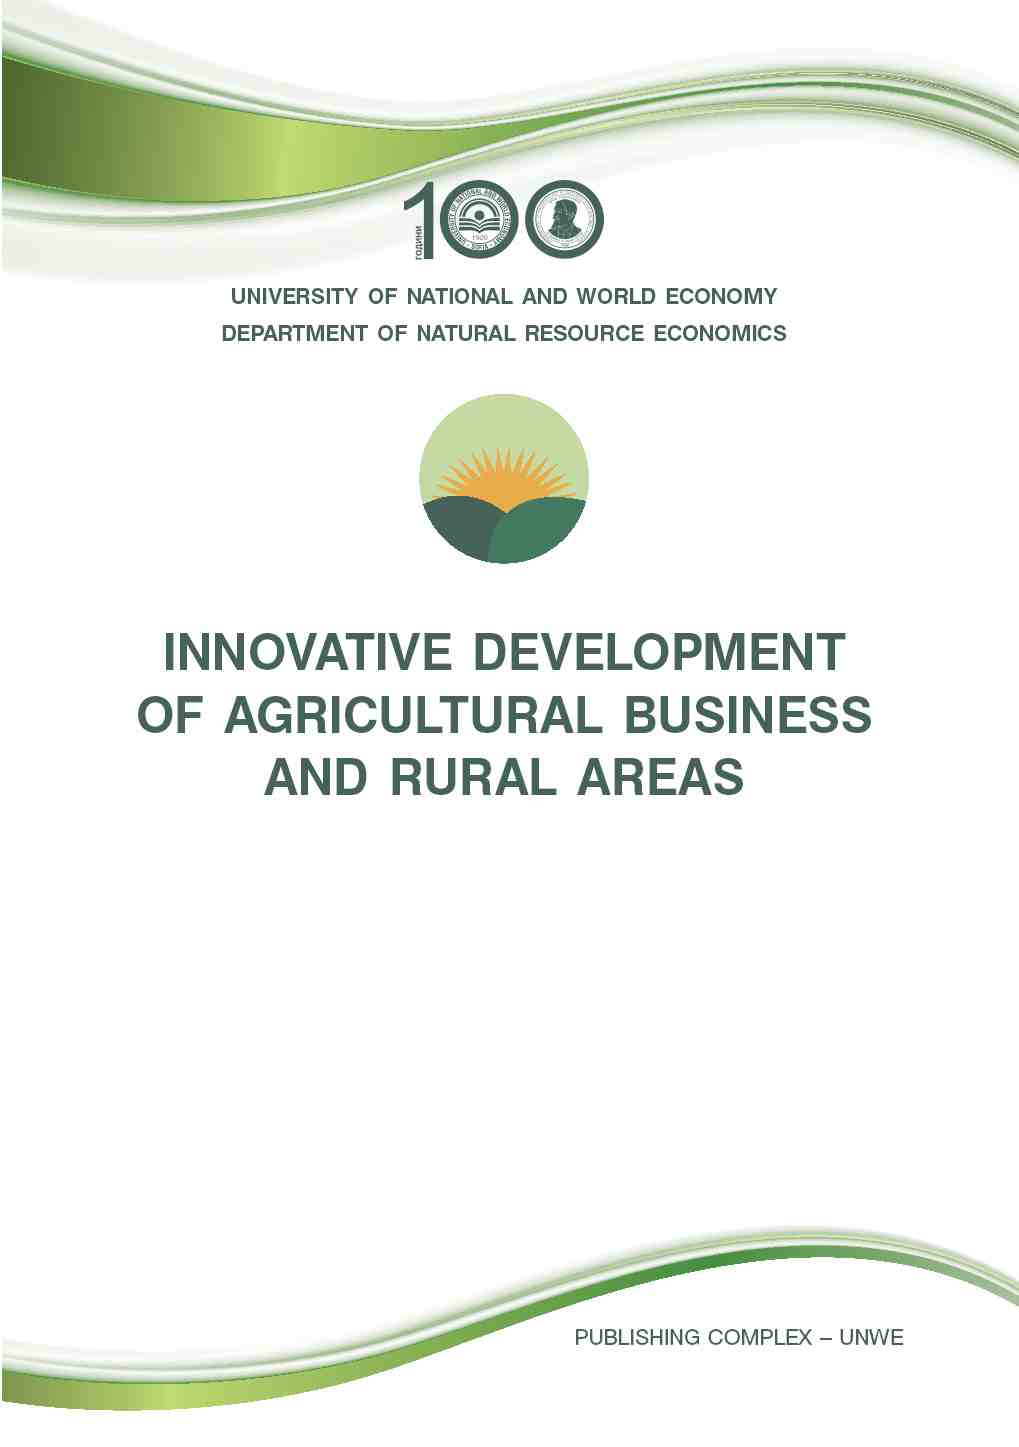 Relationship between salary and economic development in the agricultural sector in Bulgaria